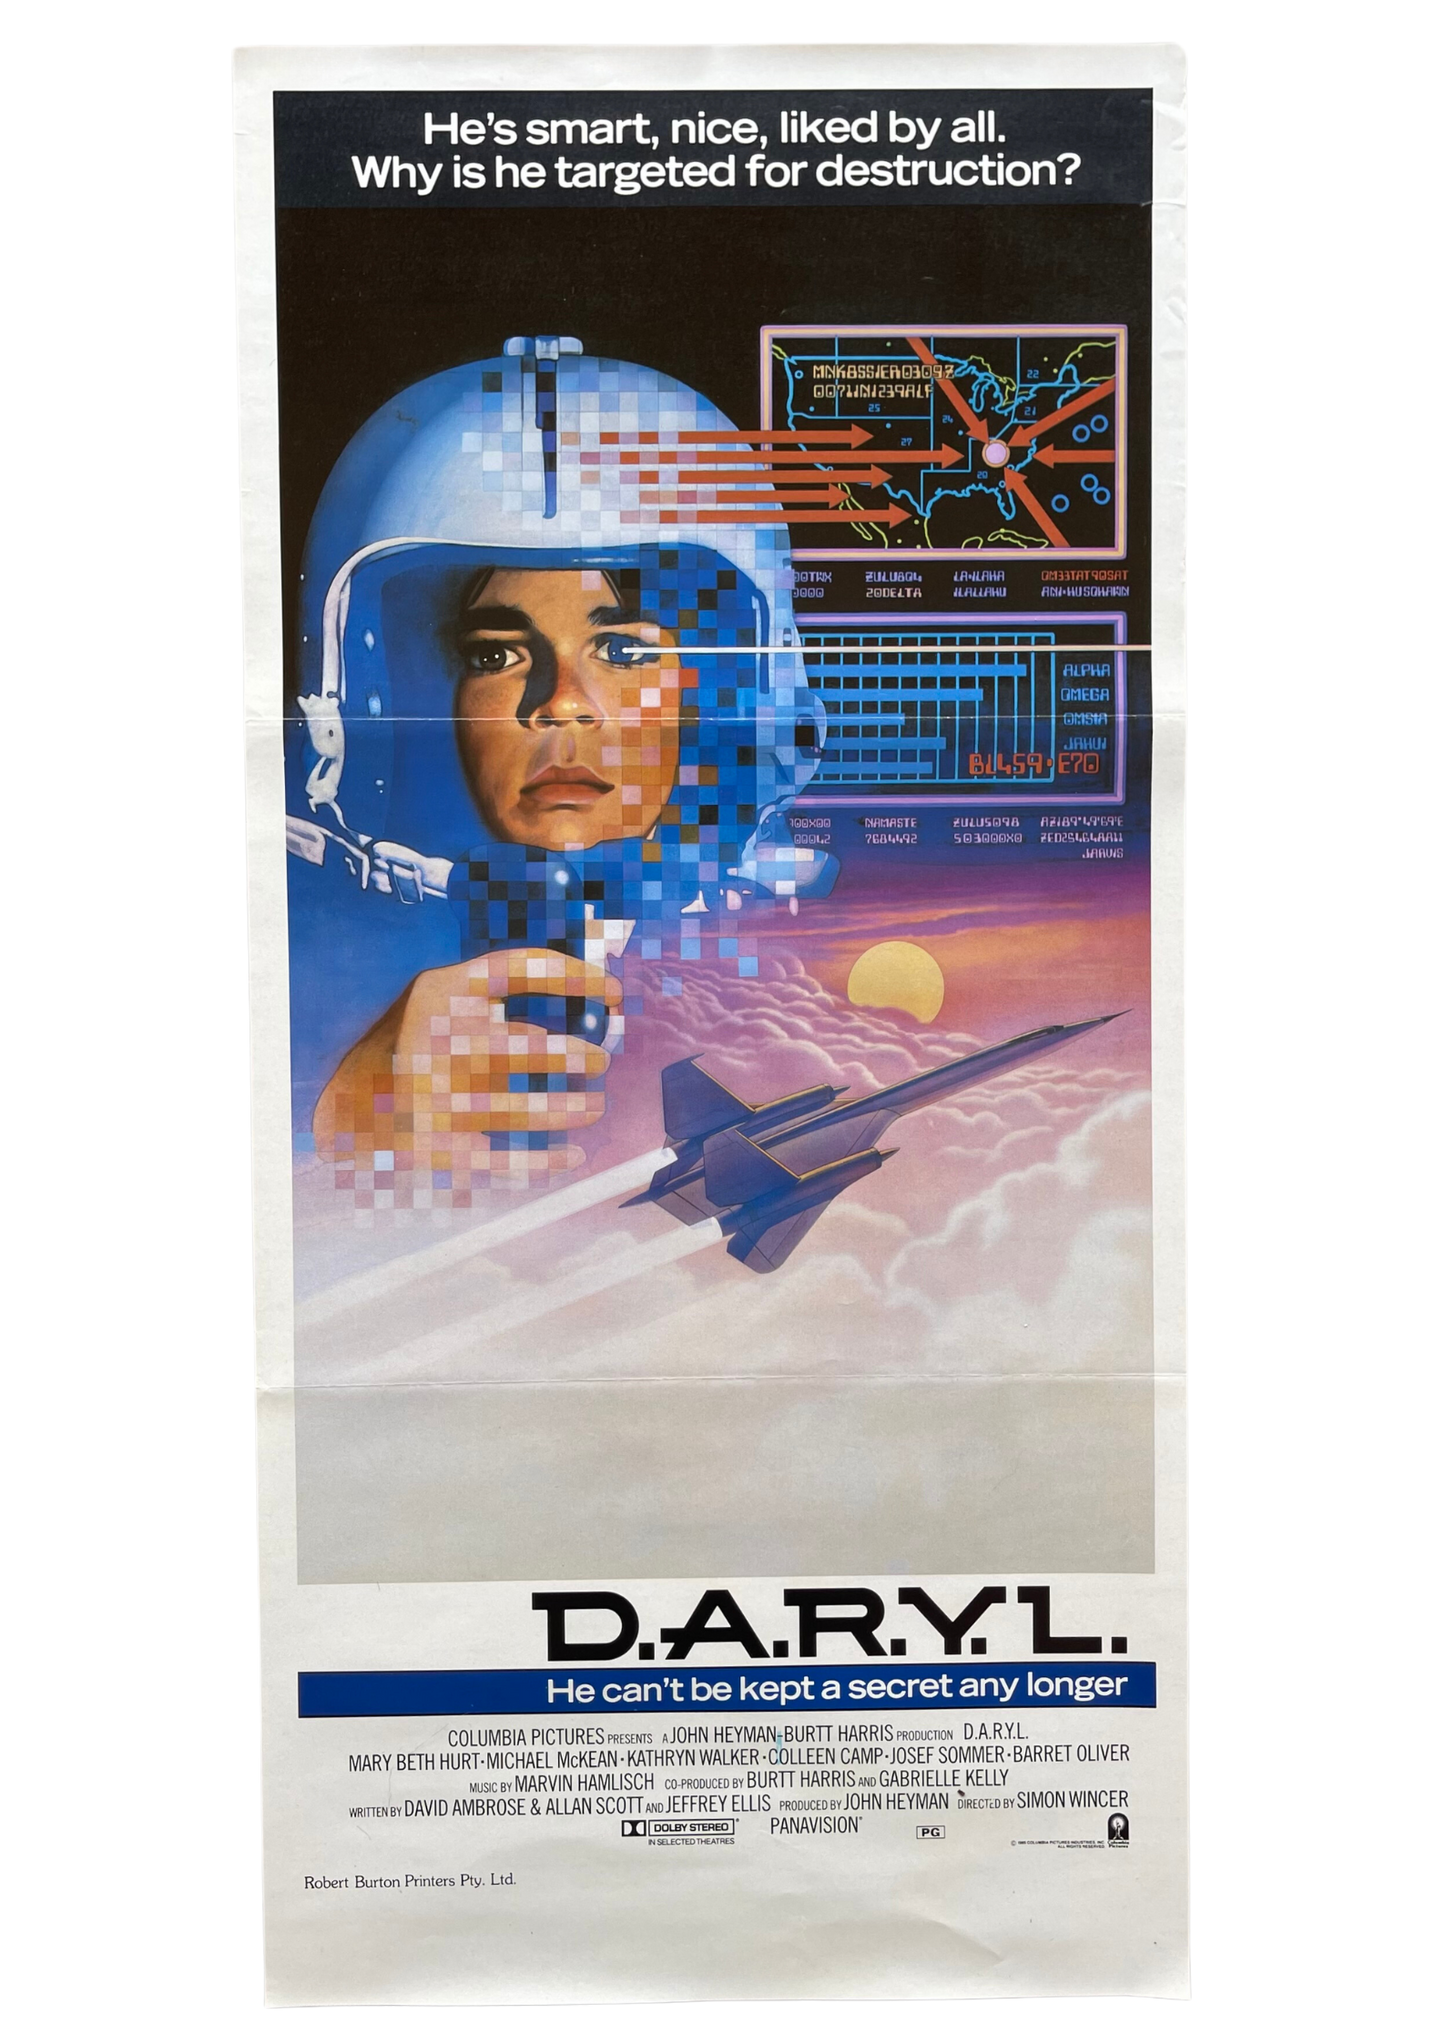 D.A.R.Y.L (1985)- Daybill